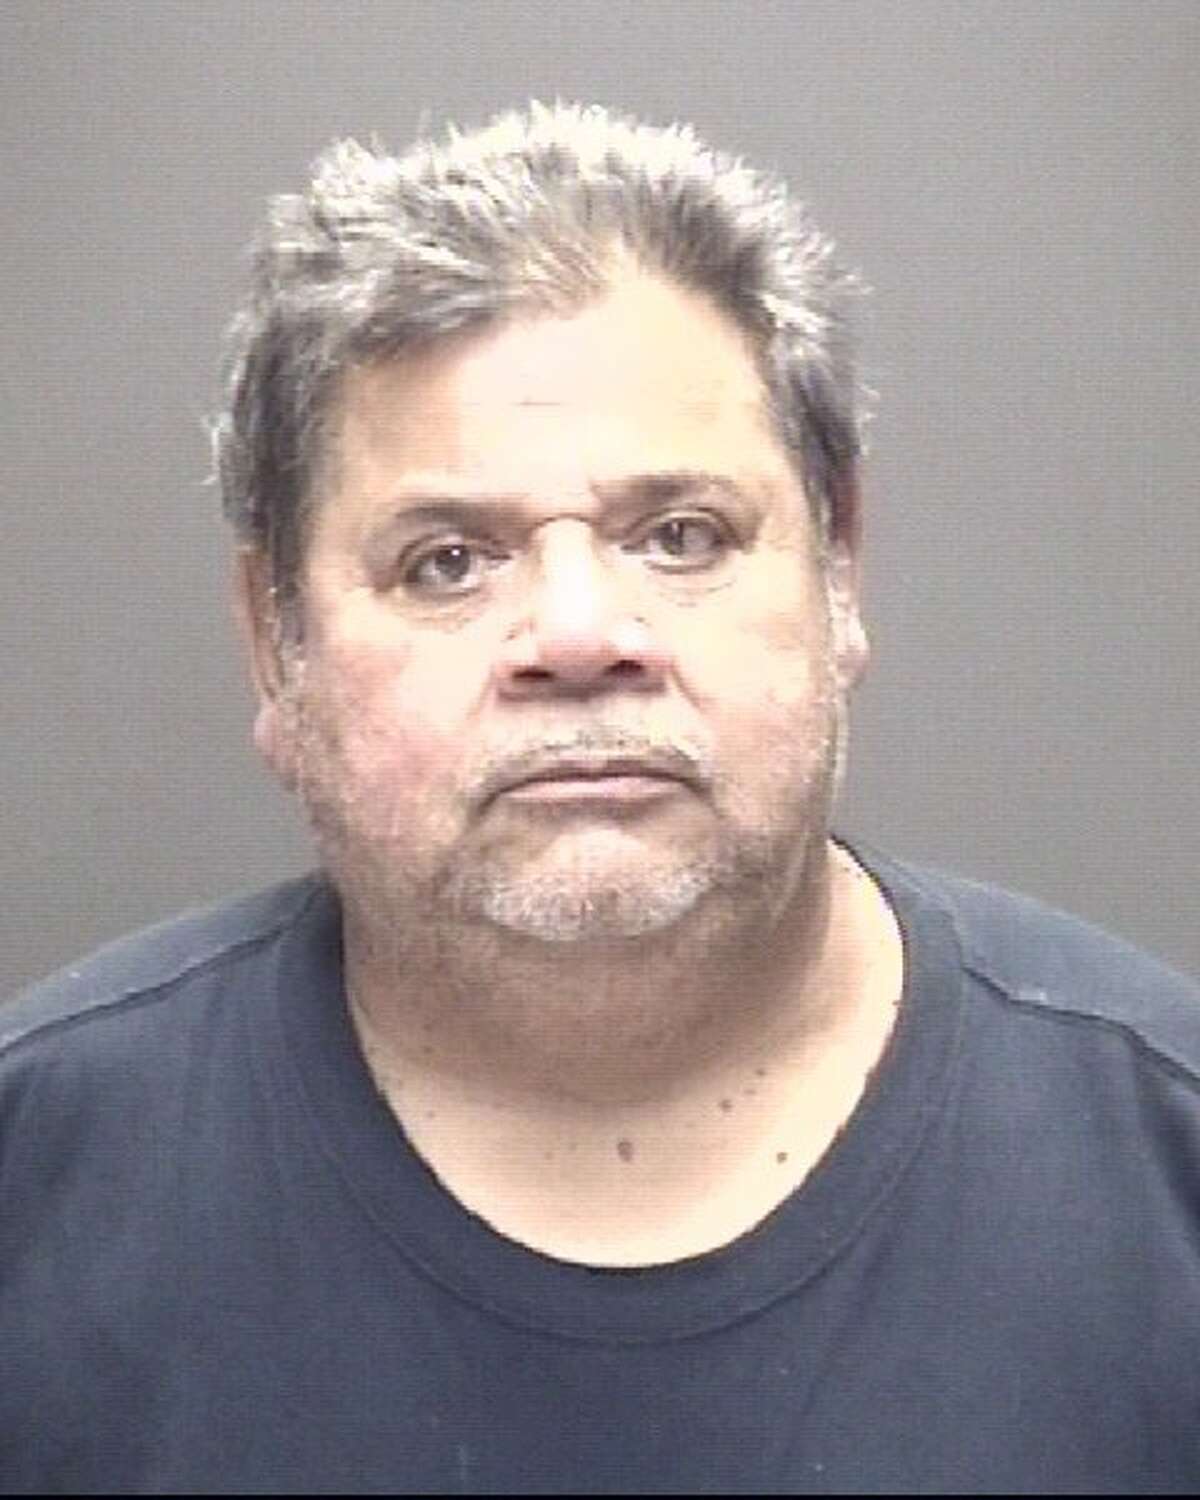 Jose Leyva, 65, is charged with murder in the April 23, 2017 death of Francisco Esparza at 3316 FM 517 in Galveston County.